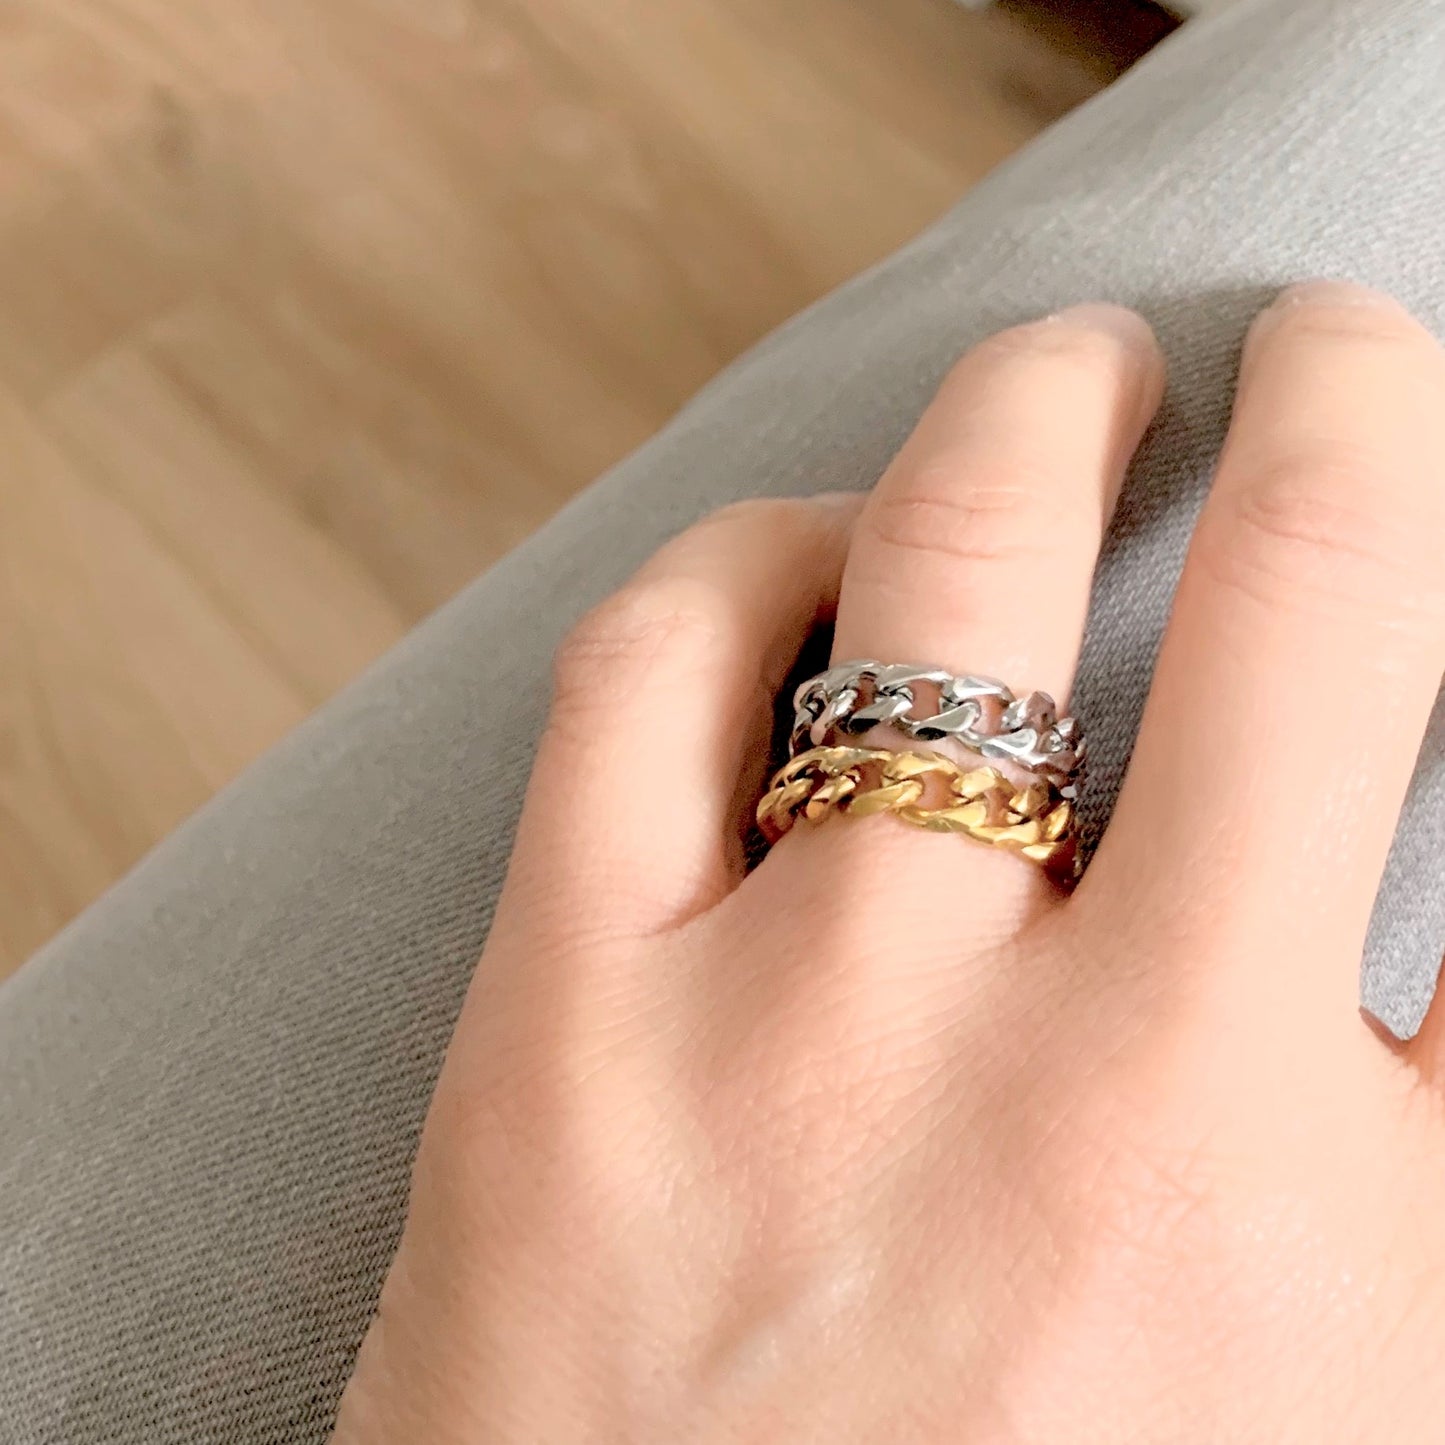 Ring - Cohen Ring | Cuban Chain Link stacked gold and high polished